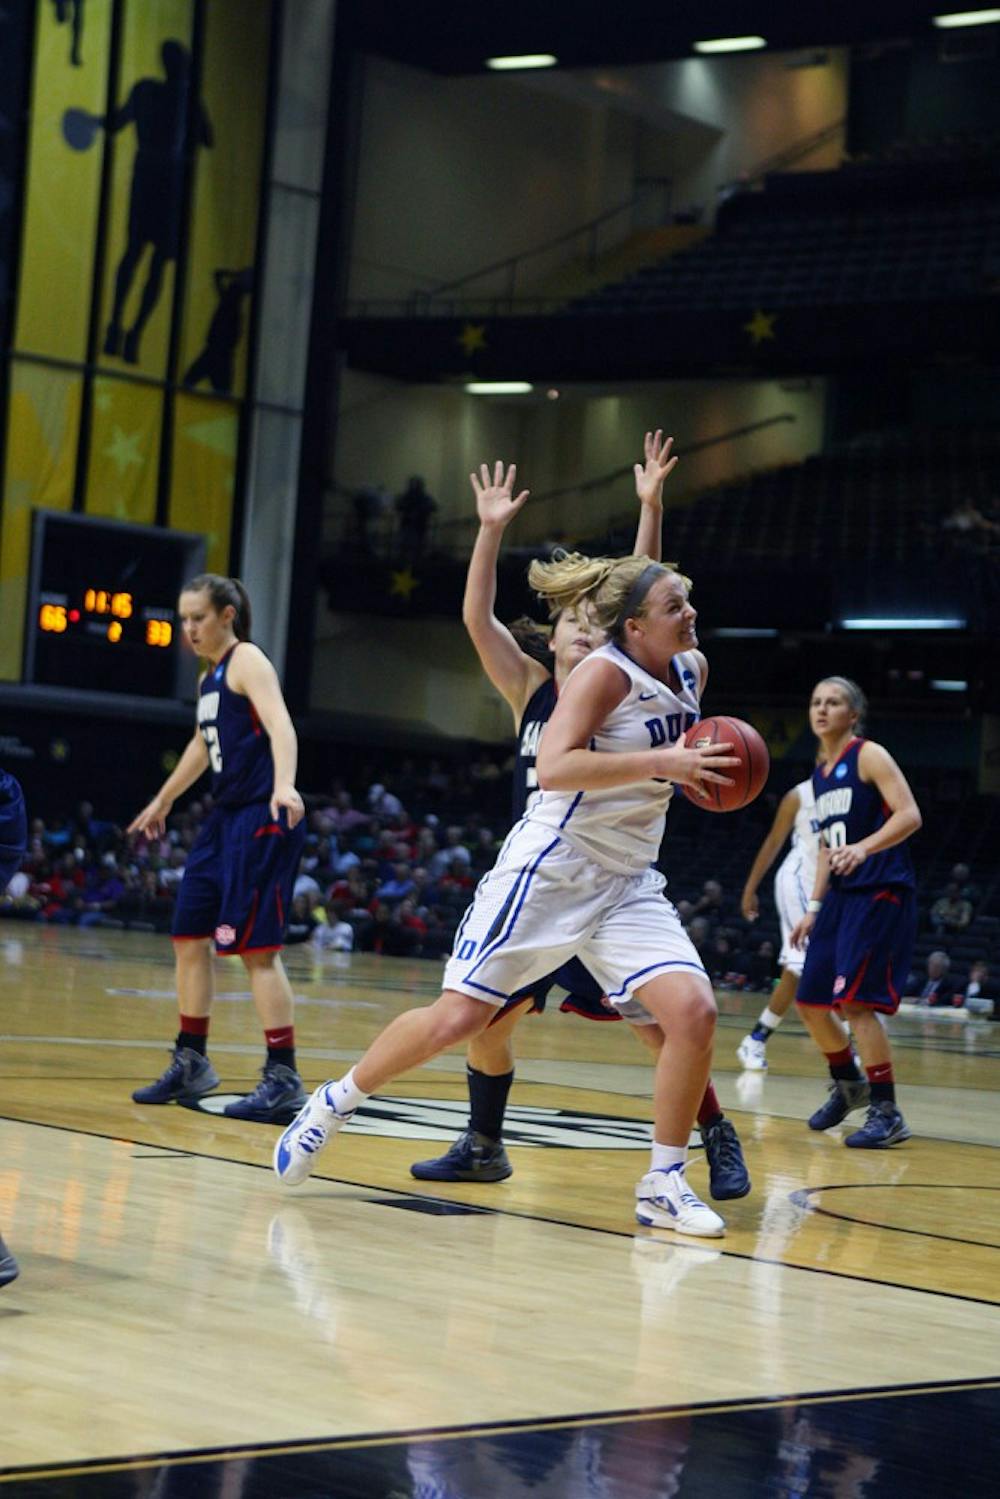 Tricia Liston had 20 points for the Blue Devils in their win Sunday against Samford